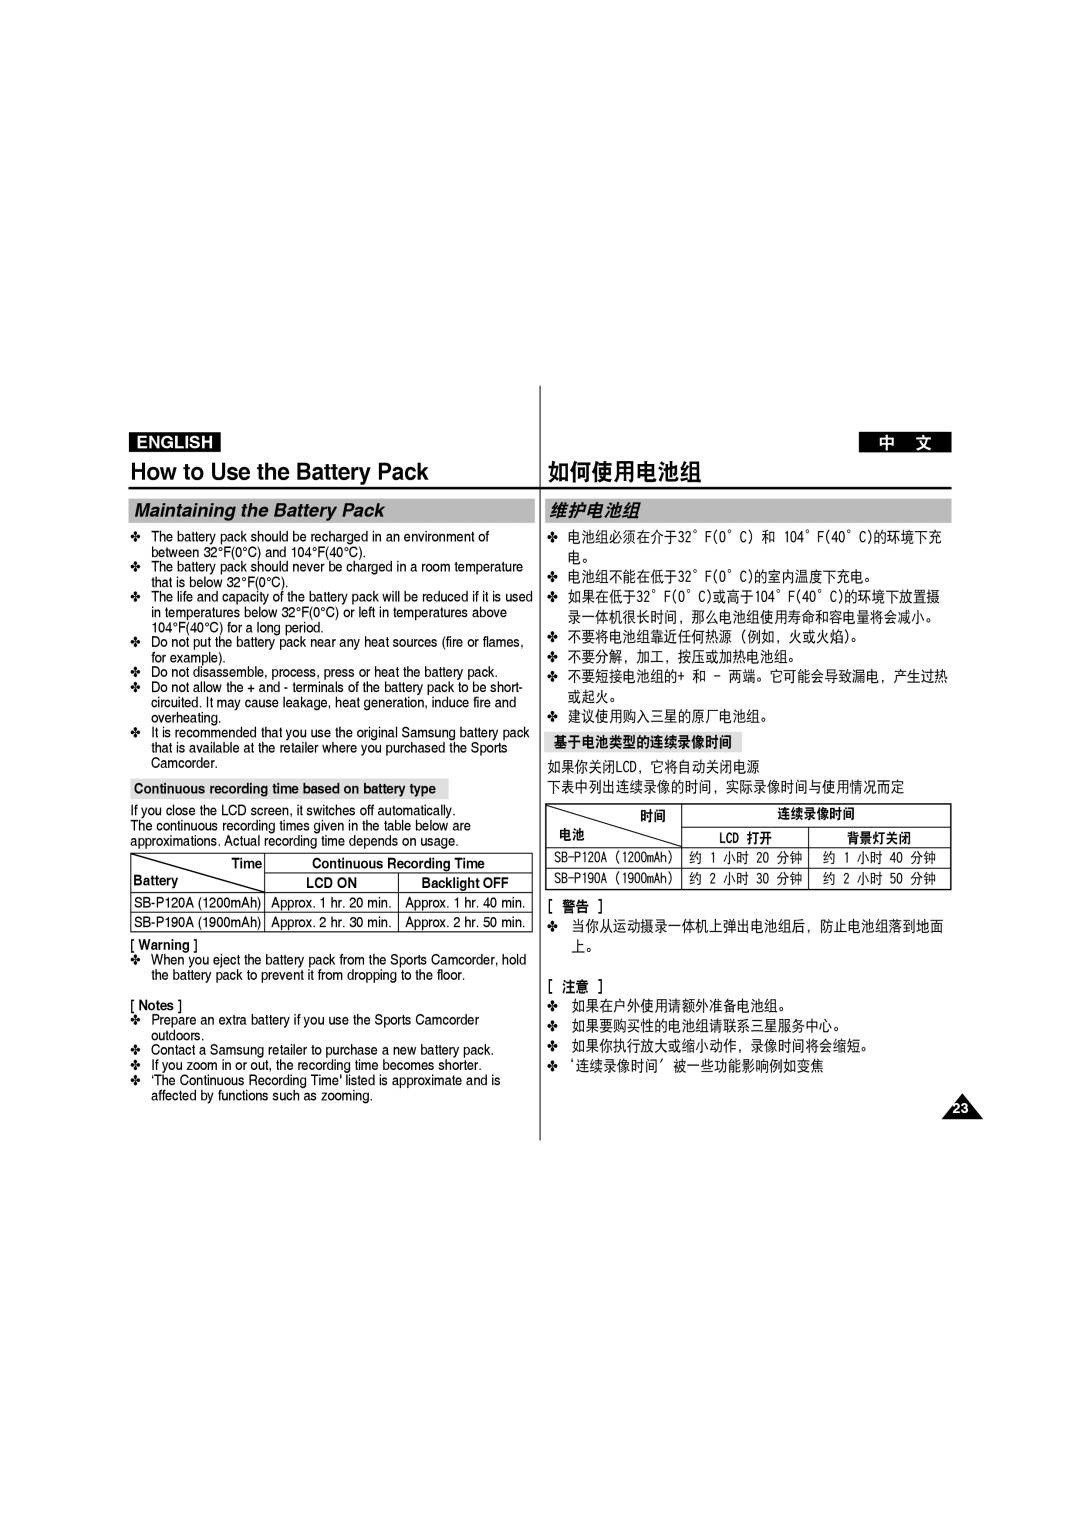 Samsung VP-X210L/CHN, VP-X210L/XEF, VP-X220L/XEF How to Use the Battery Pack, 如何使用电池组, Maintaining the Battery Pack, 维护电池组 